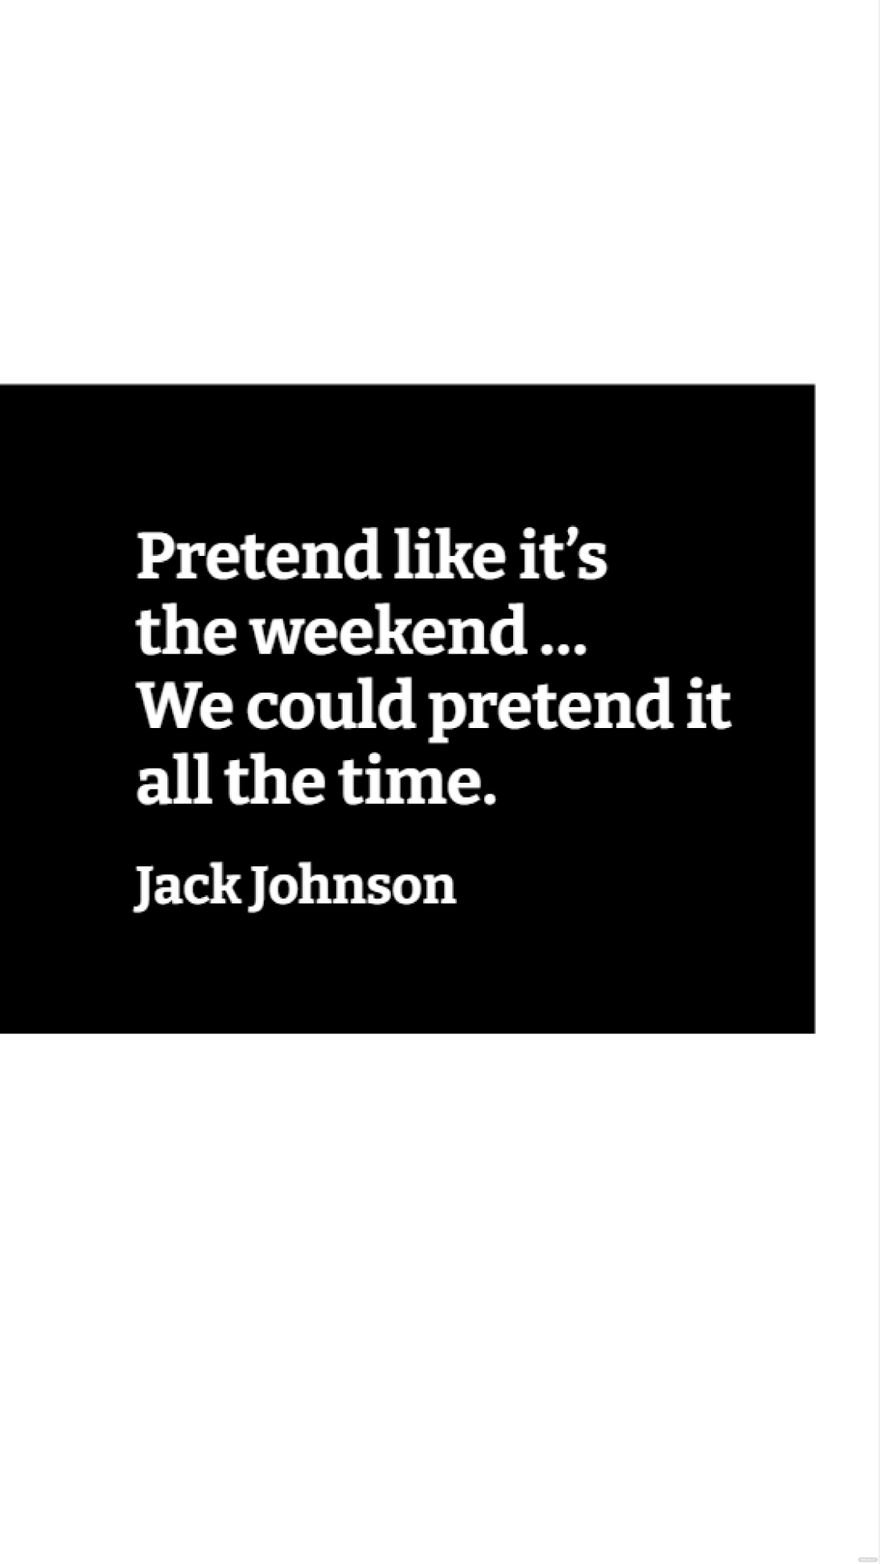 Free Jack Johnson - Pretend like it’s the weekend … We could pretend it all the time. 